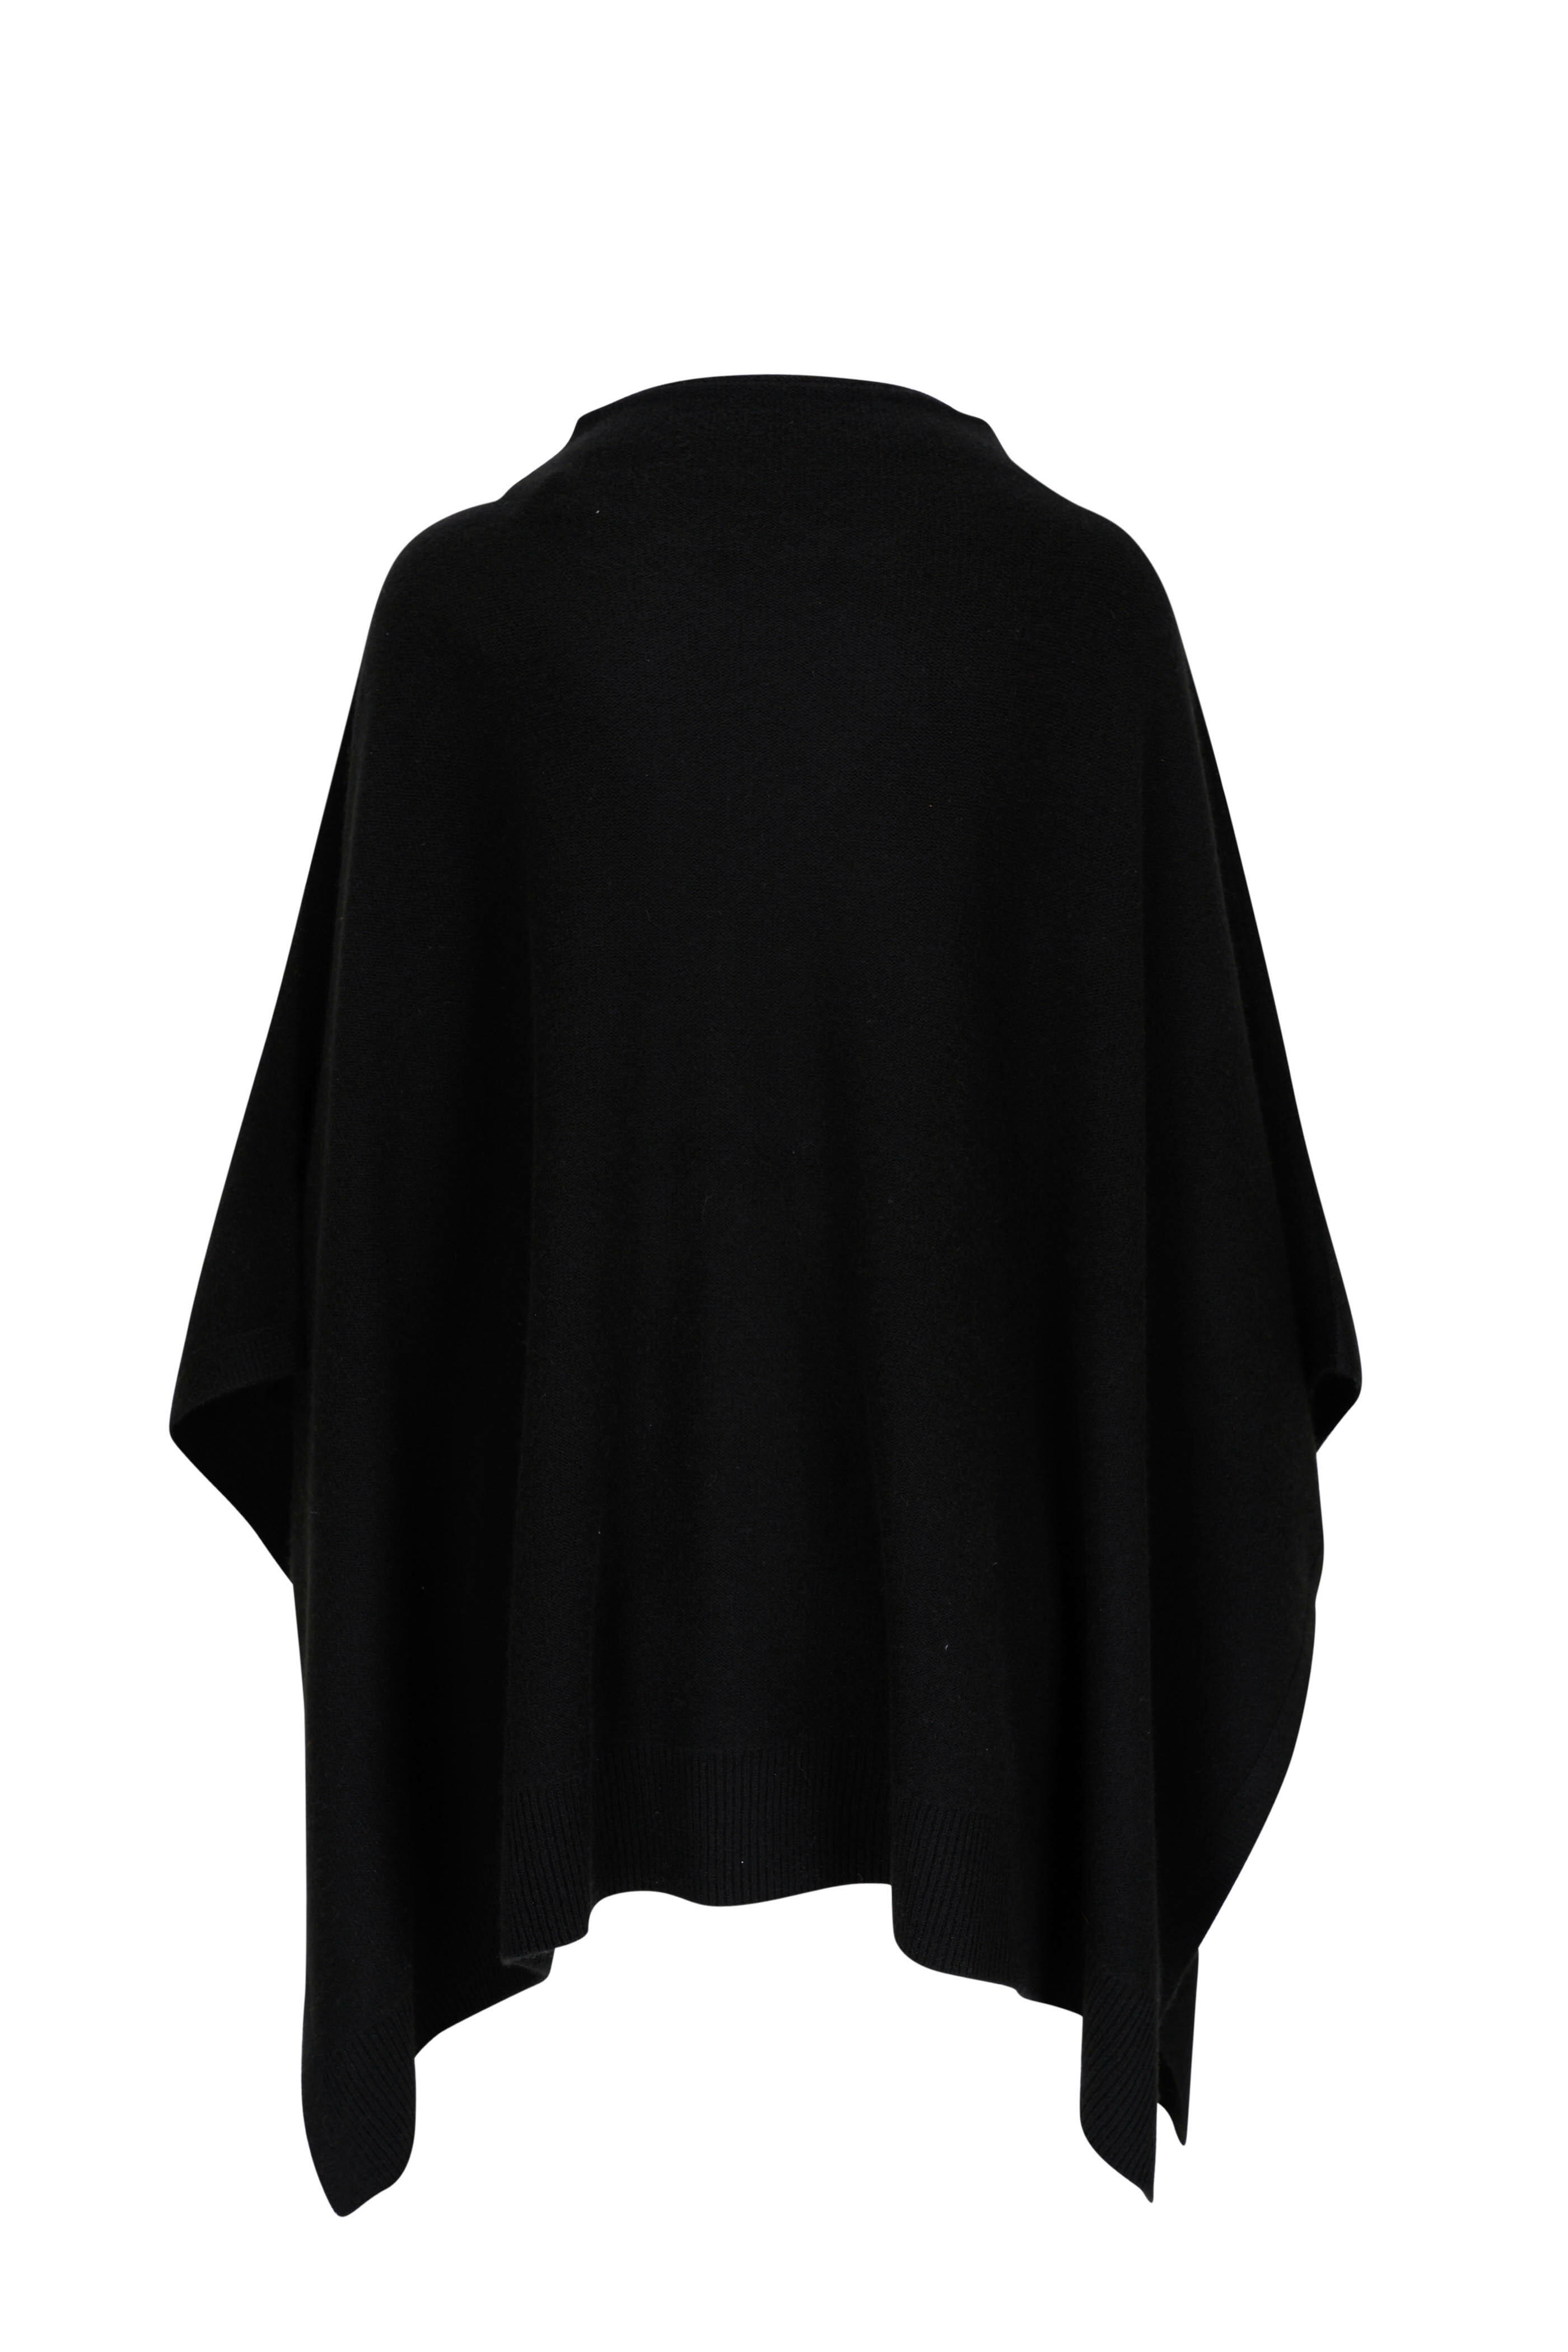 Vince - Black Cashmere Poncho | Mitchell Stores